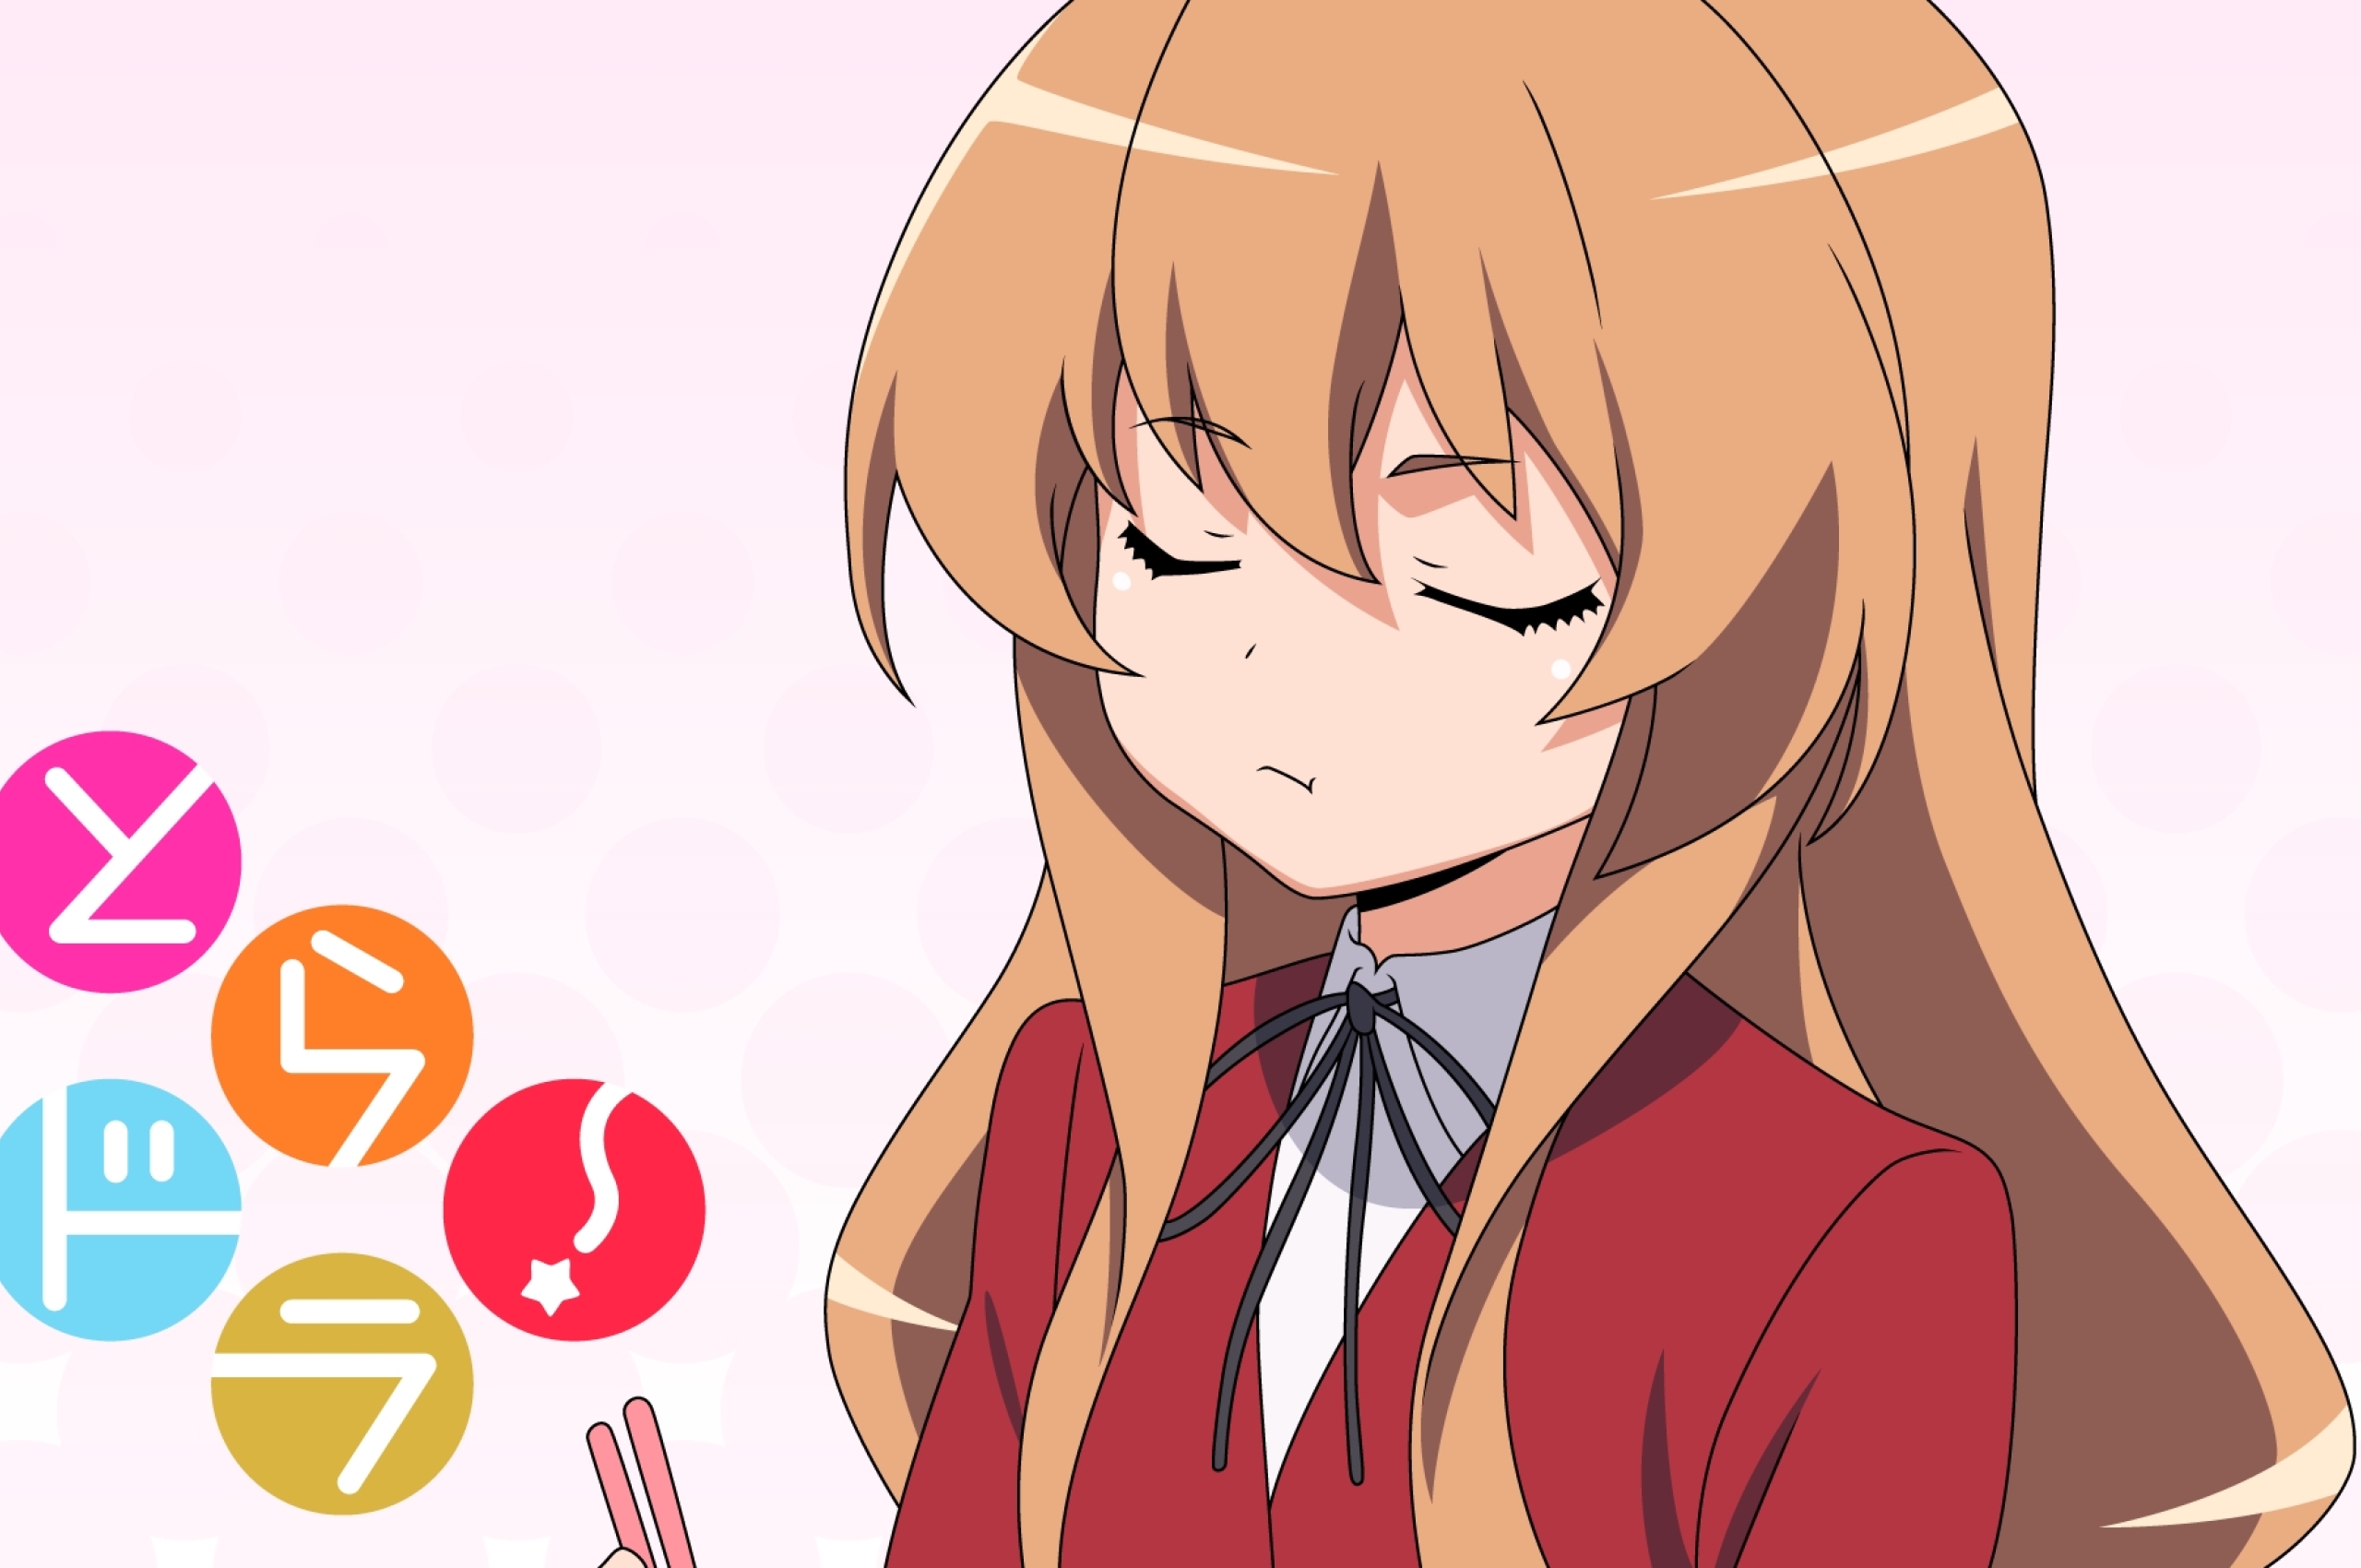 2560x1700 Taiga Aisaka Toradora Anime Chromebook Pixel Wallpaper Hd Anime 4k Wallpapers Images Photos And Background Our wallpapers span across all the most popular anime. 2560x1700 taiga aisaka toradora anime